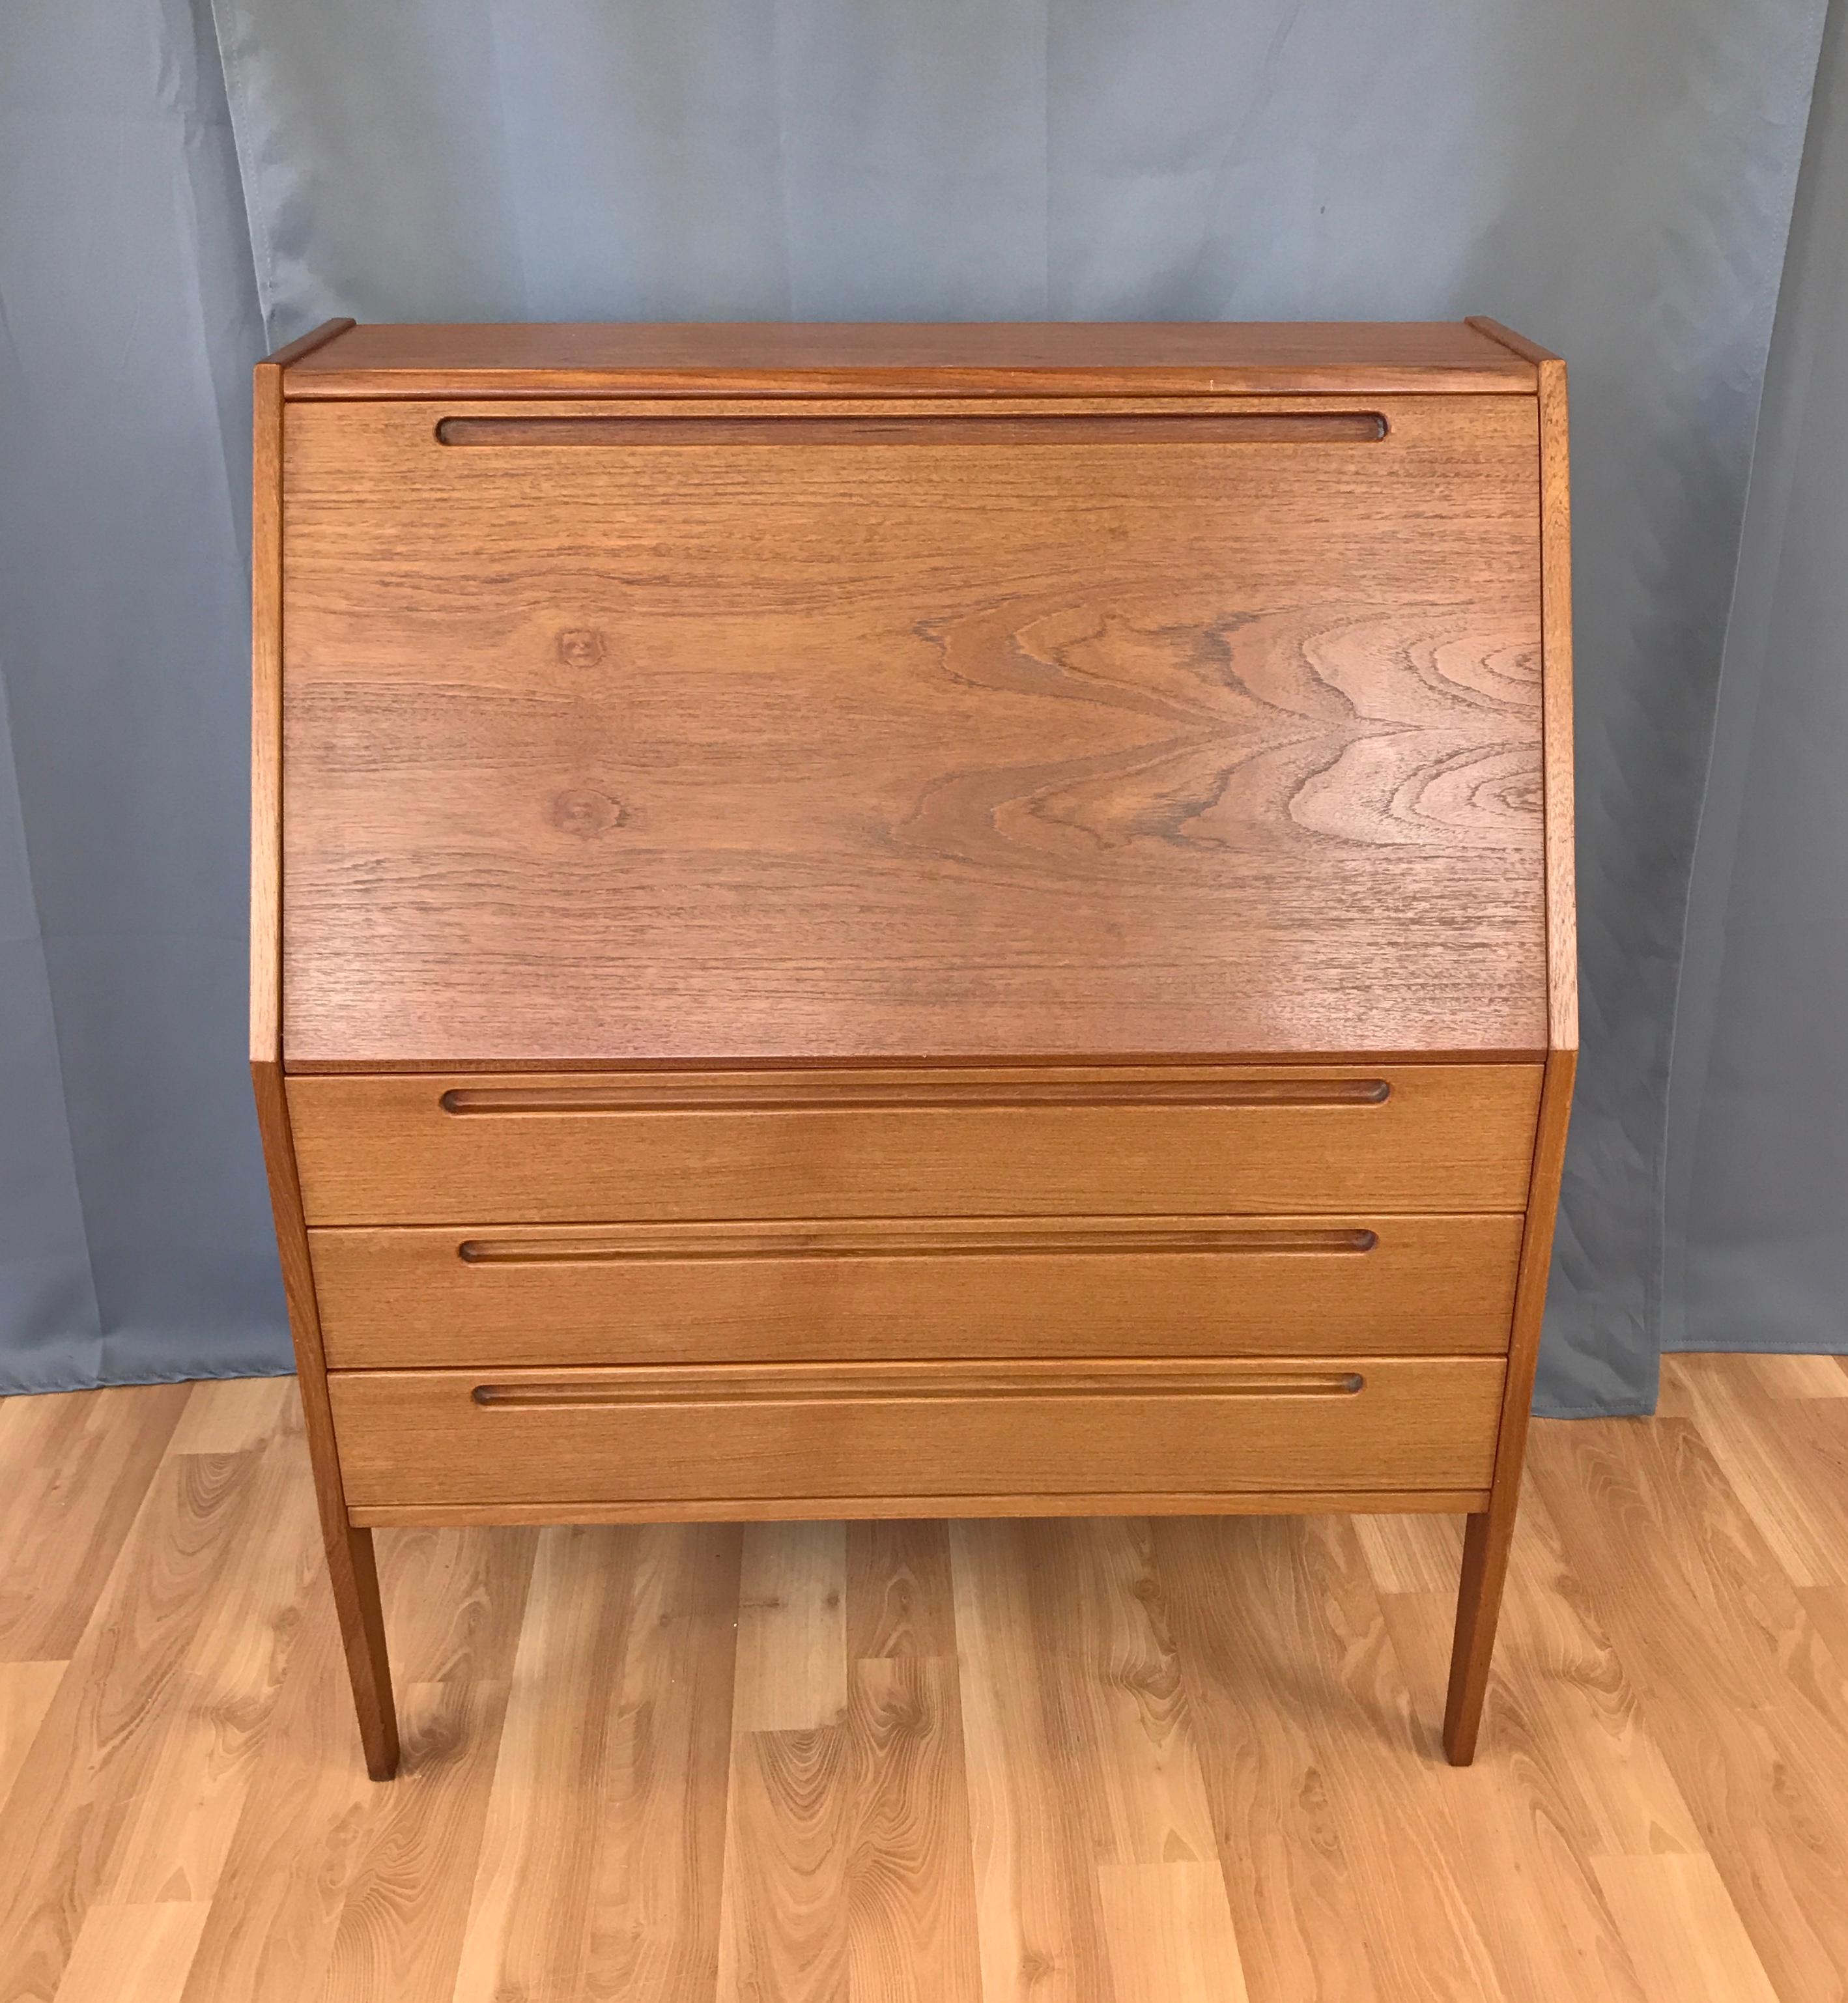 A Danish modern teak secretary by Nils Jonsson for HJN Møbler, circa 1960s

It's practical yet elegant. Simple tapered legs support a 3 drawer base for storage. The desk surface folds closed to hide all the paper while the flat top is the perfect